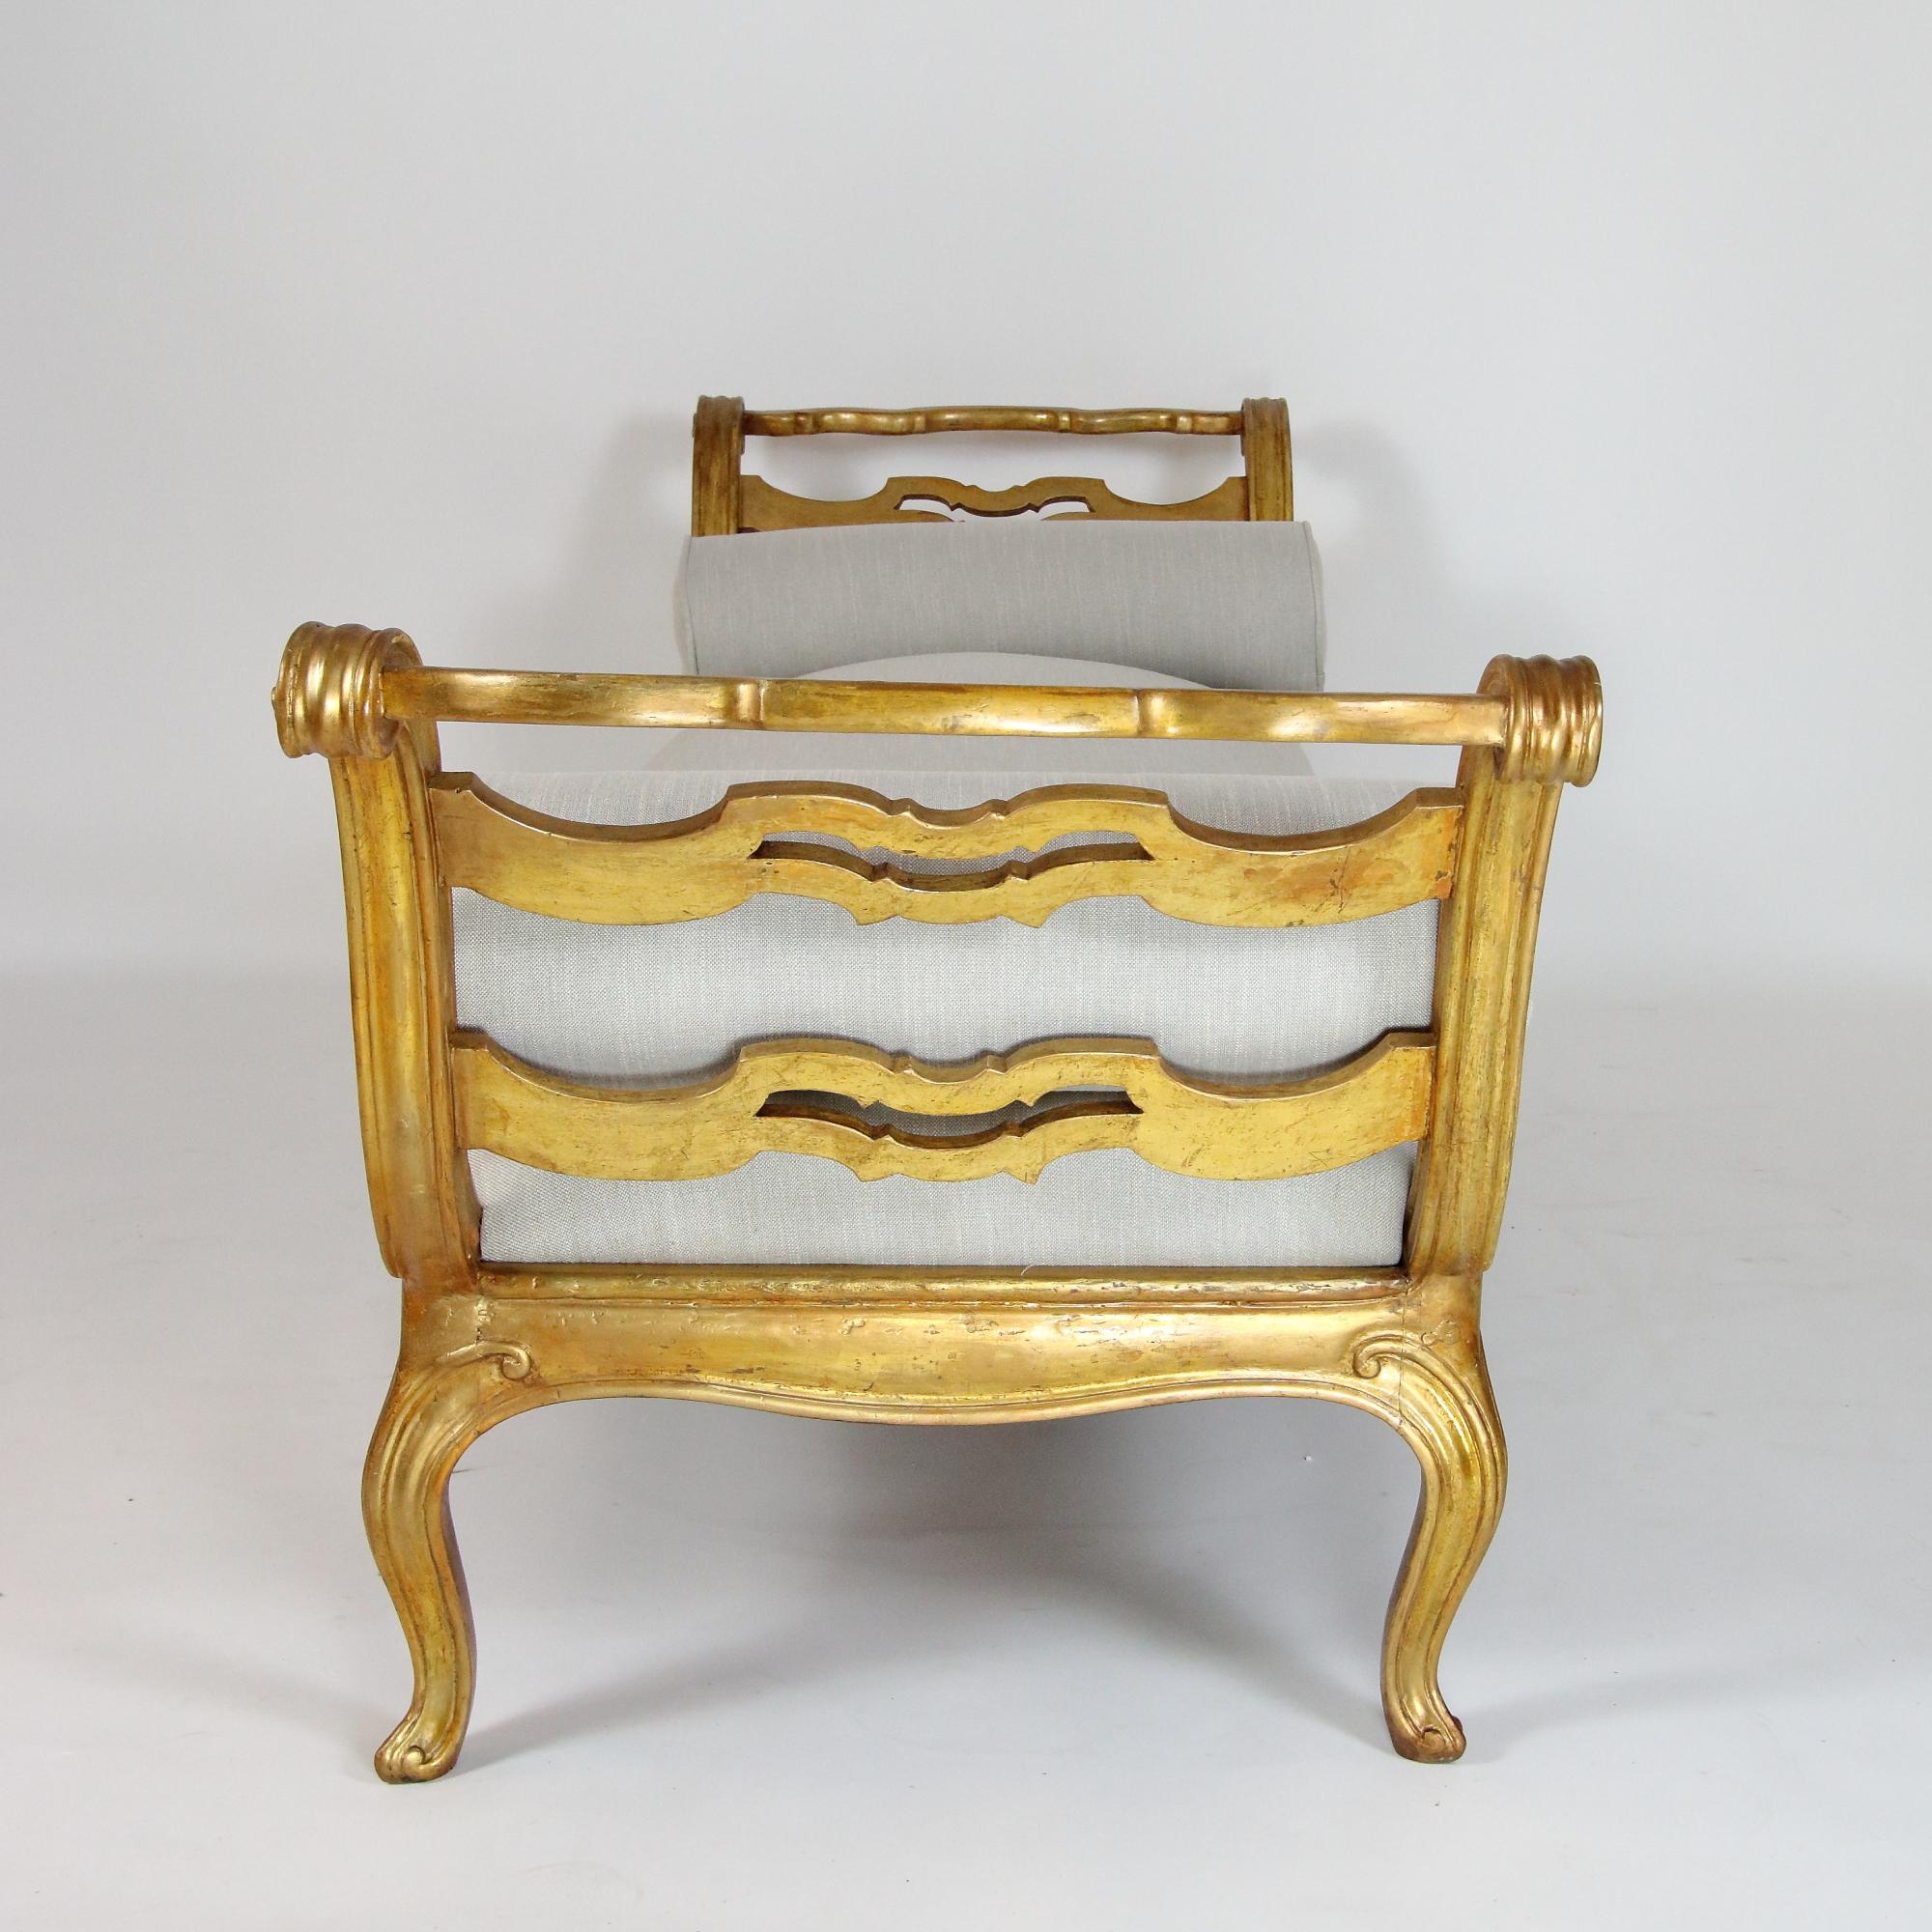 18th Century French/Provencal Louis XV Giltwood Bench or Daybed 1